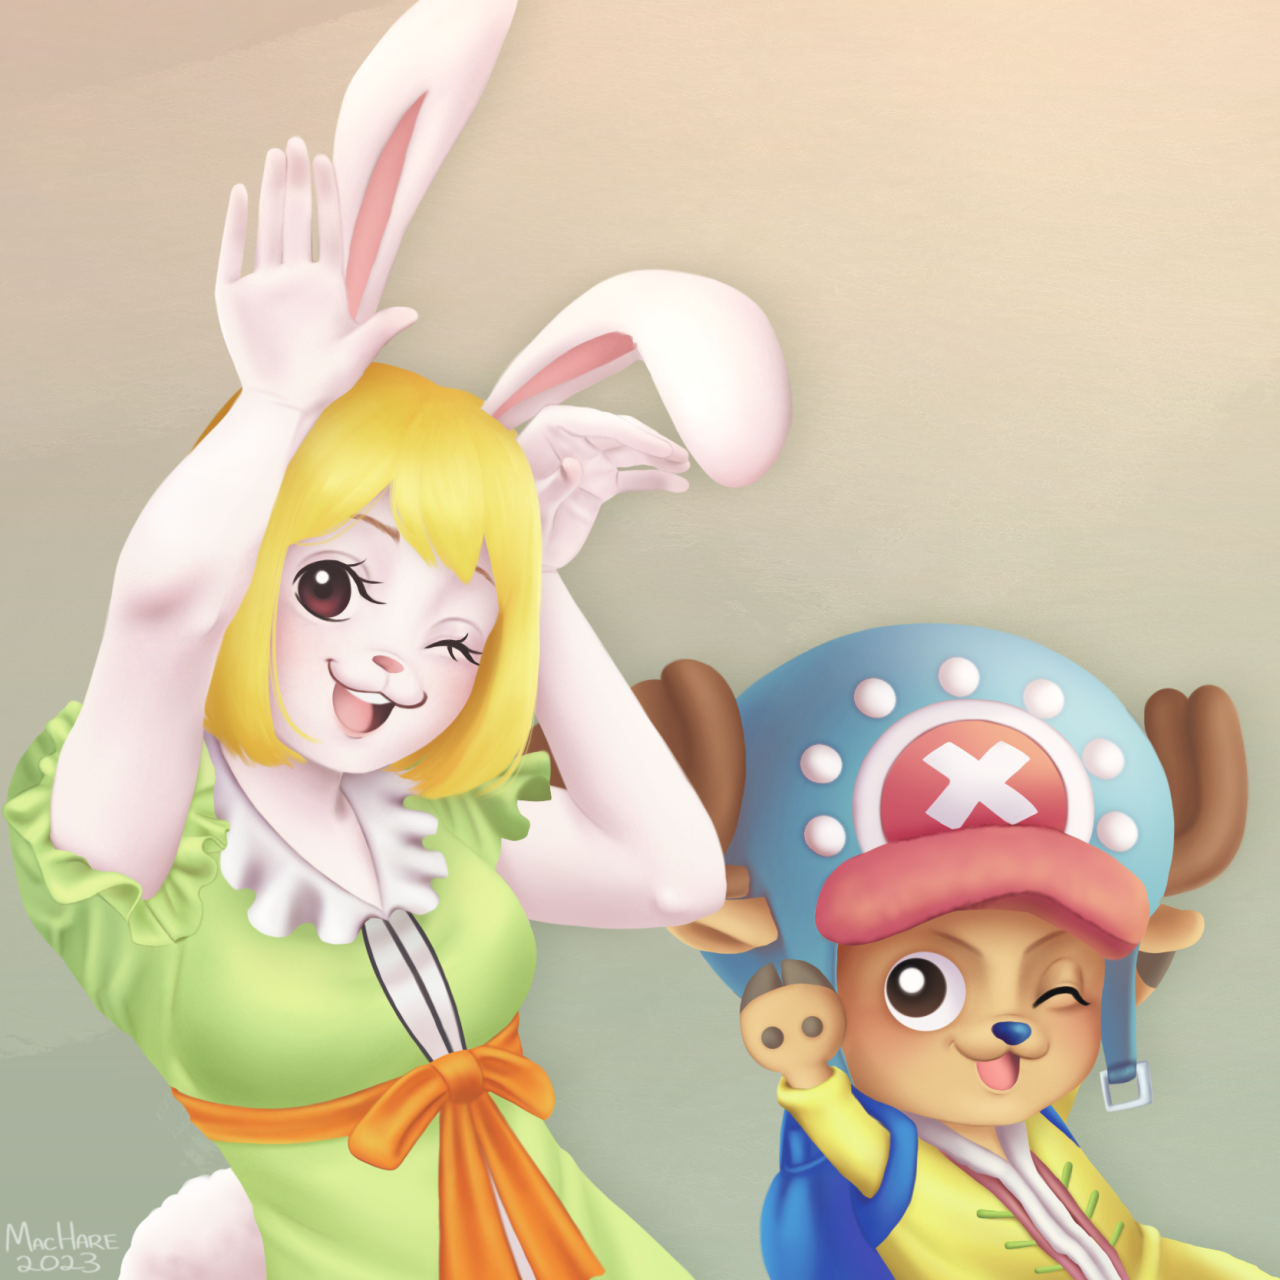 Chopper and Carrot by Victopia on DeviantArt